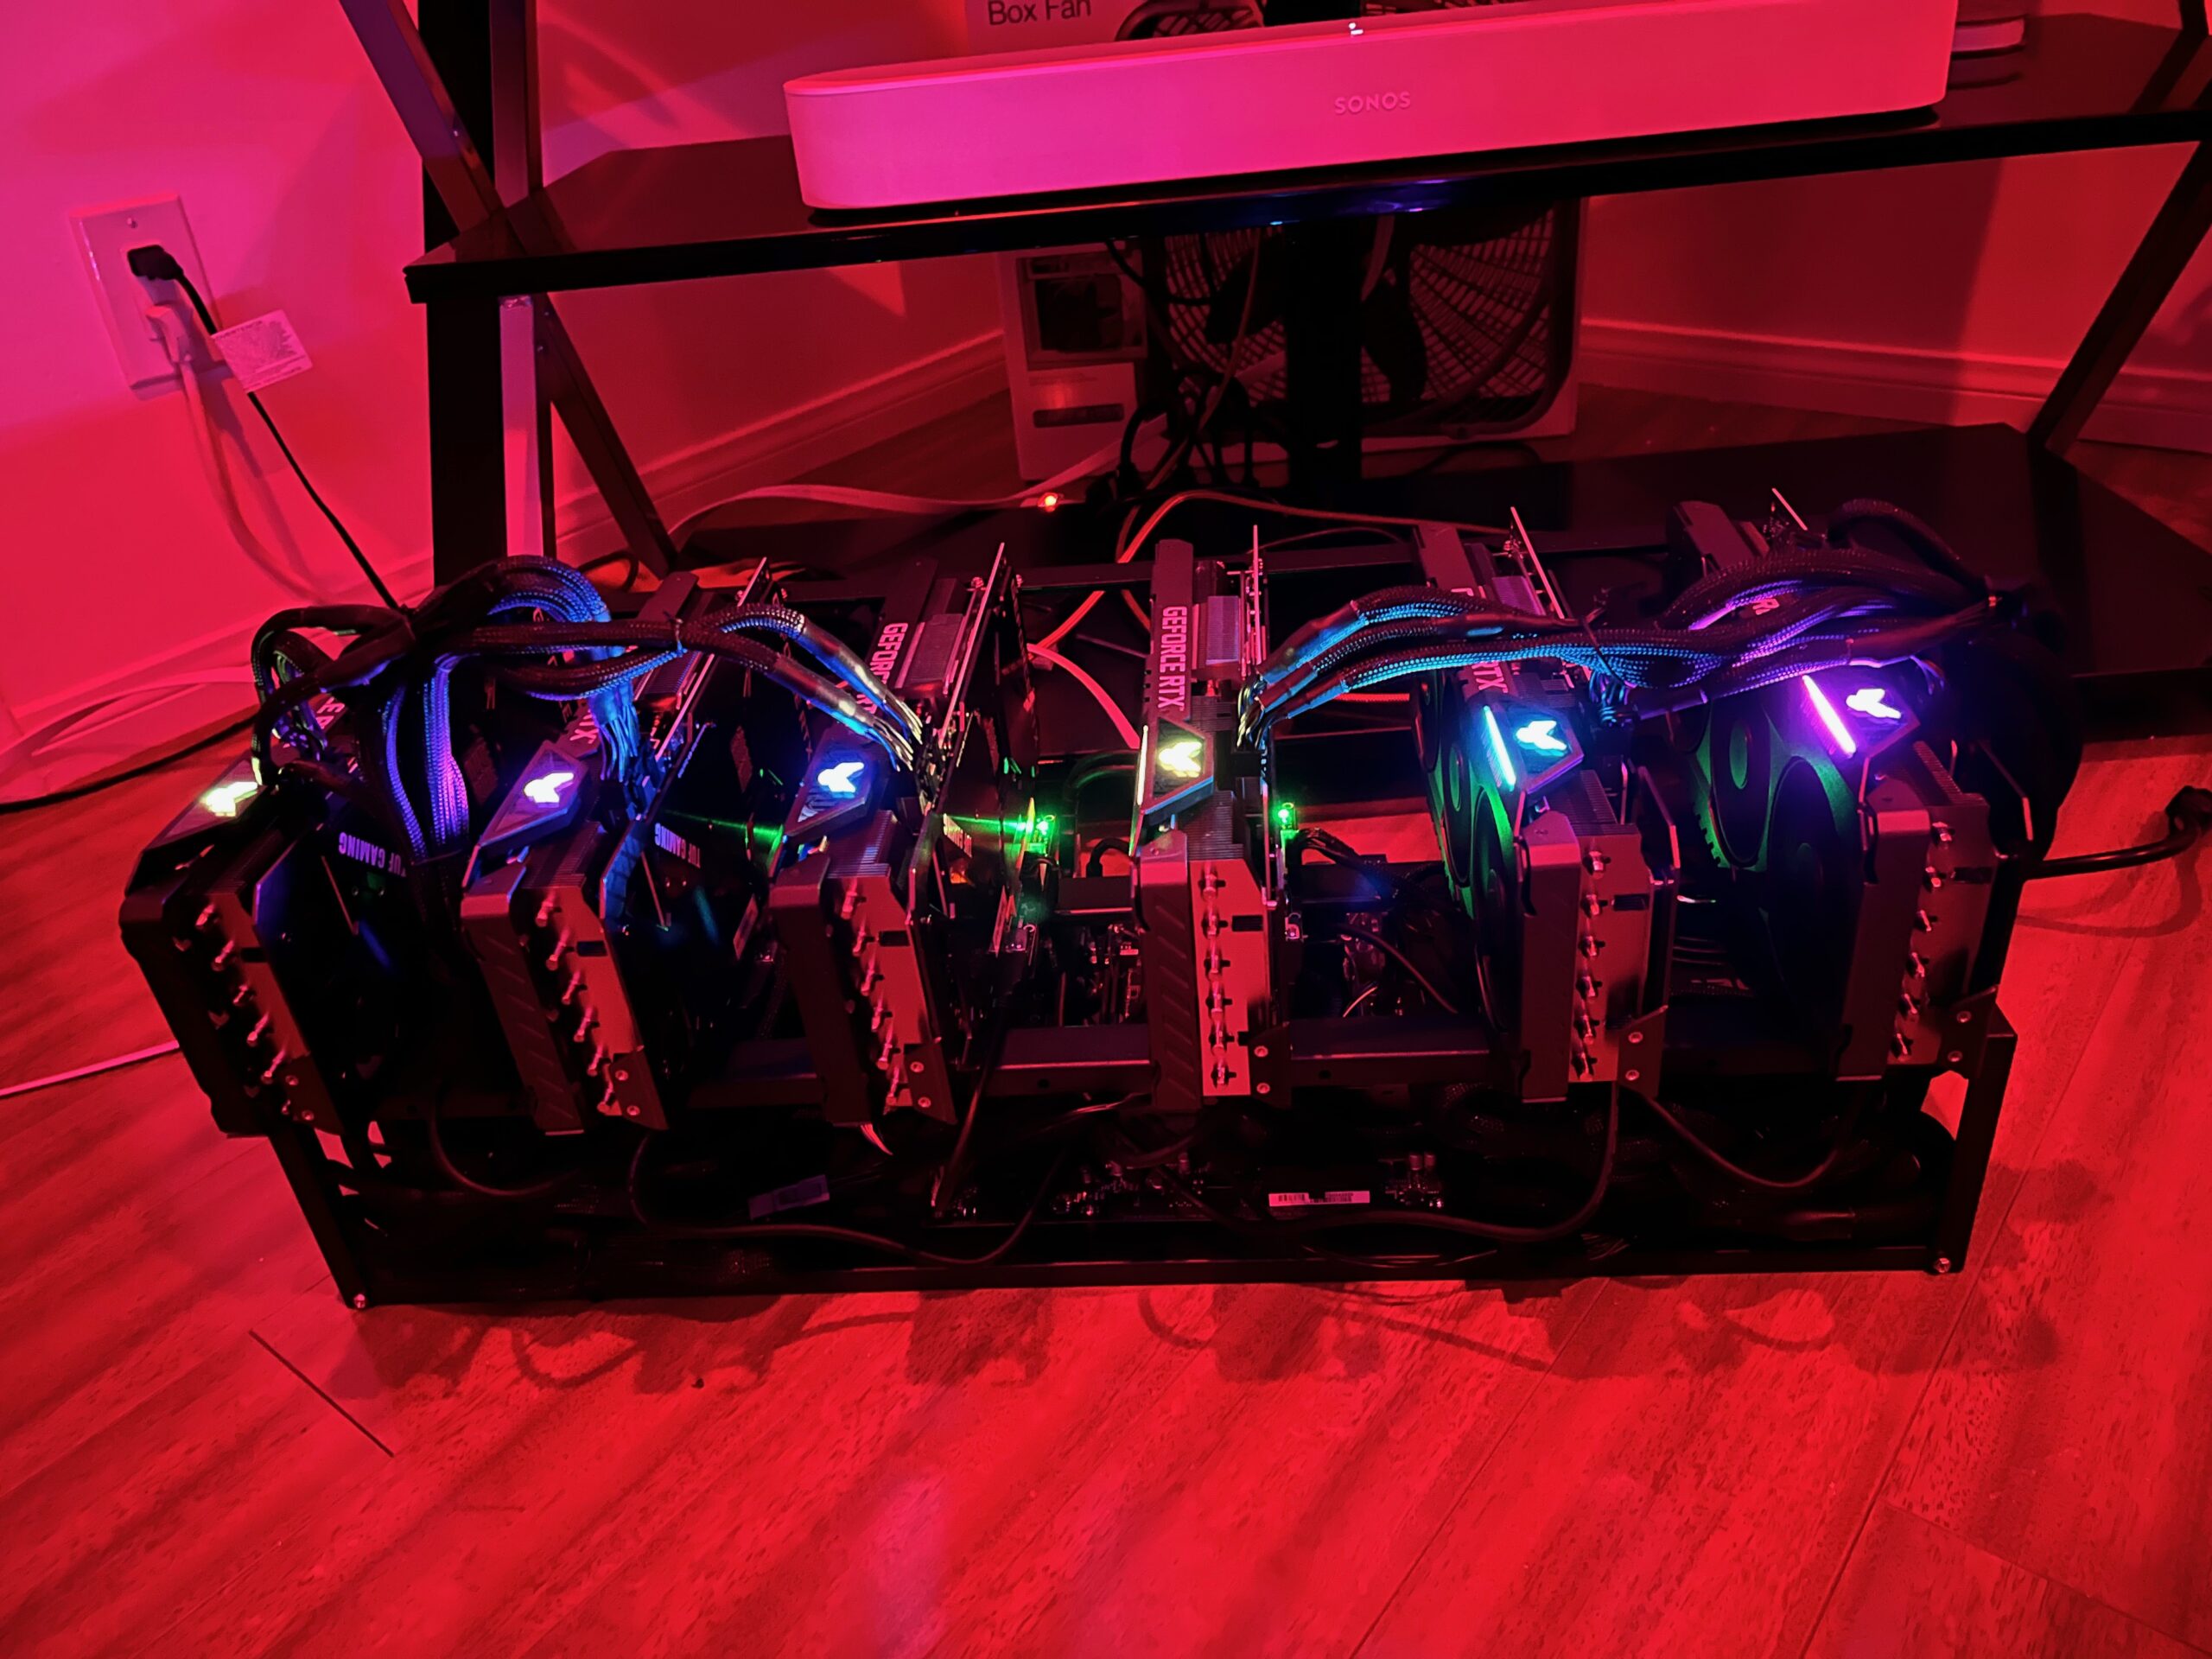 <a data-caption-title=6x 3080 Mining Rig" data-caption-desc="Earning $1400 a month"</a>